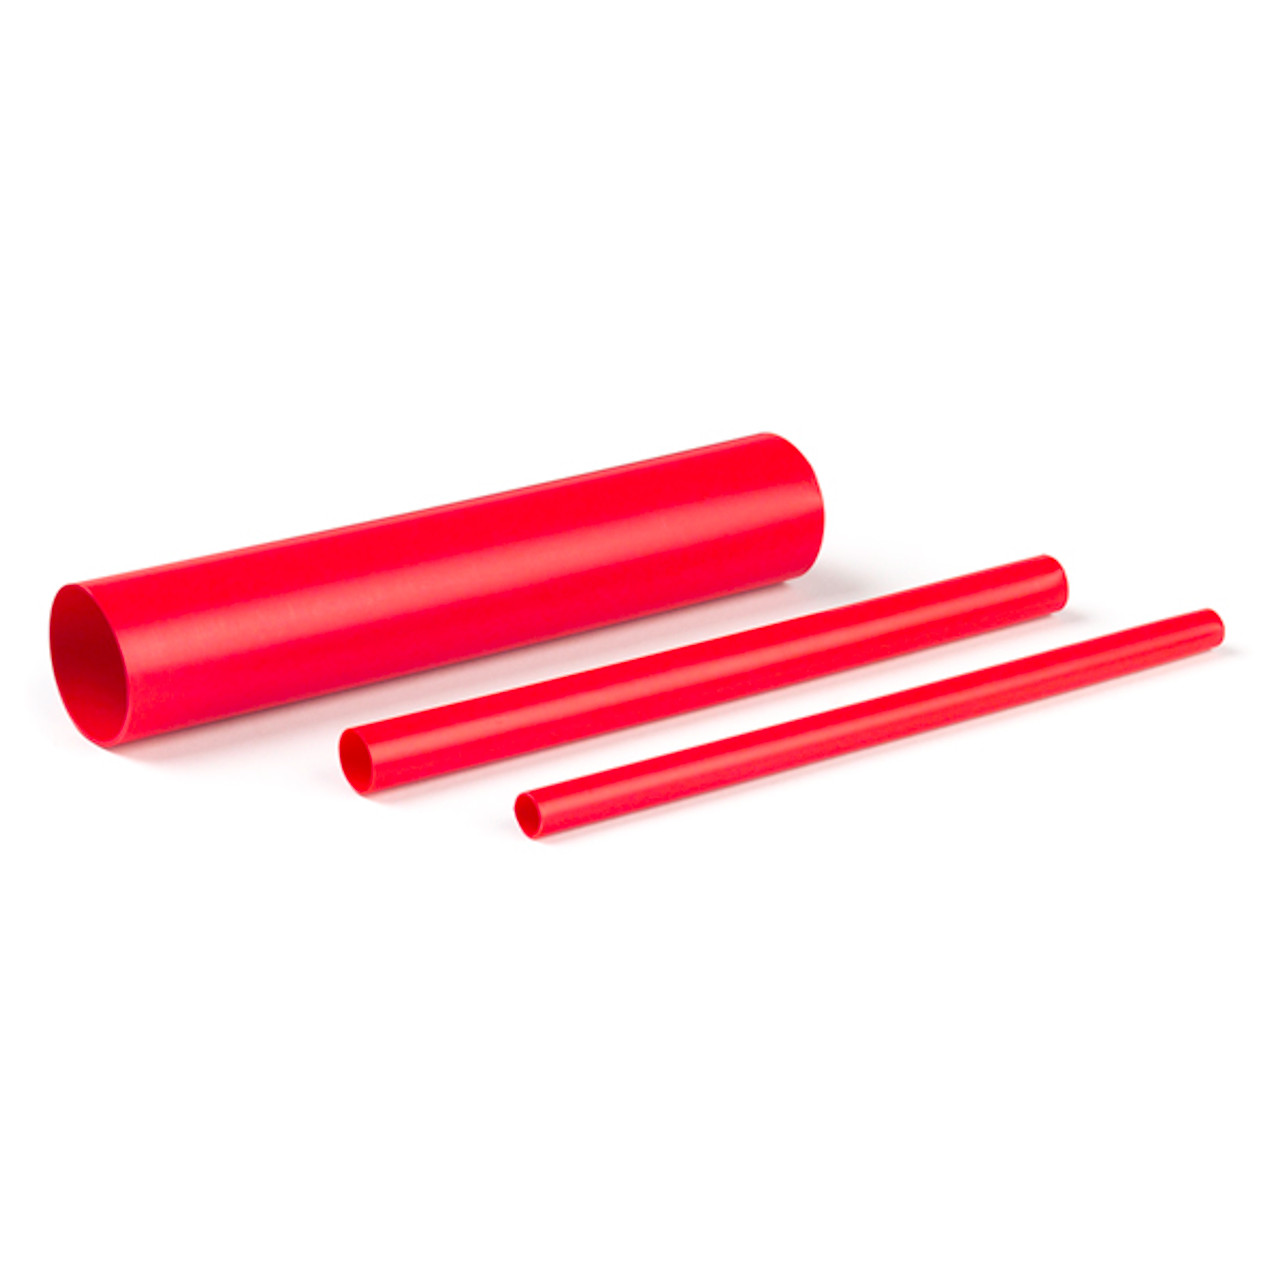 3/4" Dual Wall 3:1 Heat Shrink Tubing 6" @ 6 Pack - Red  84-6103